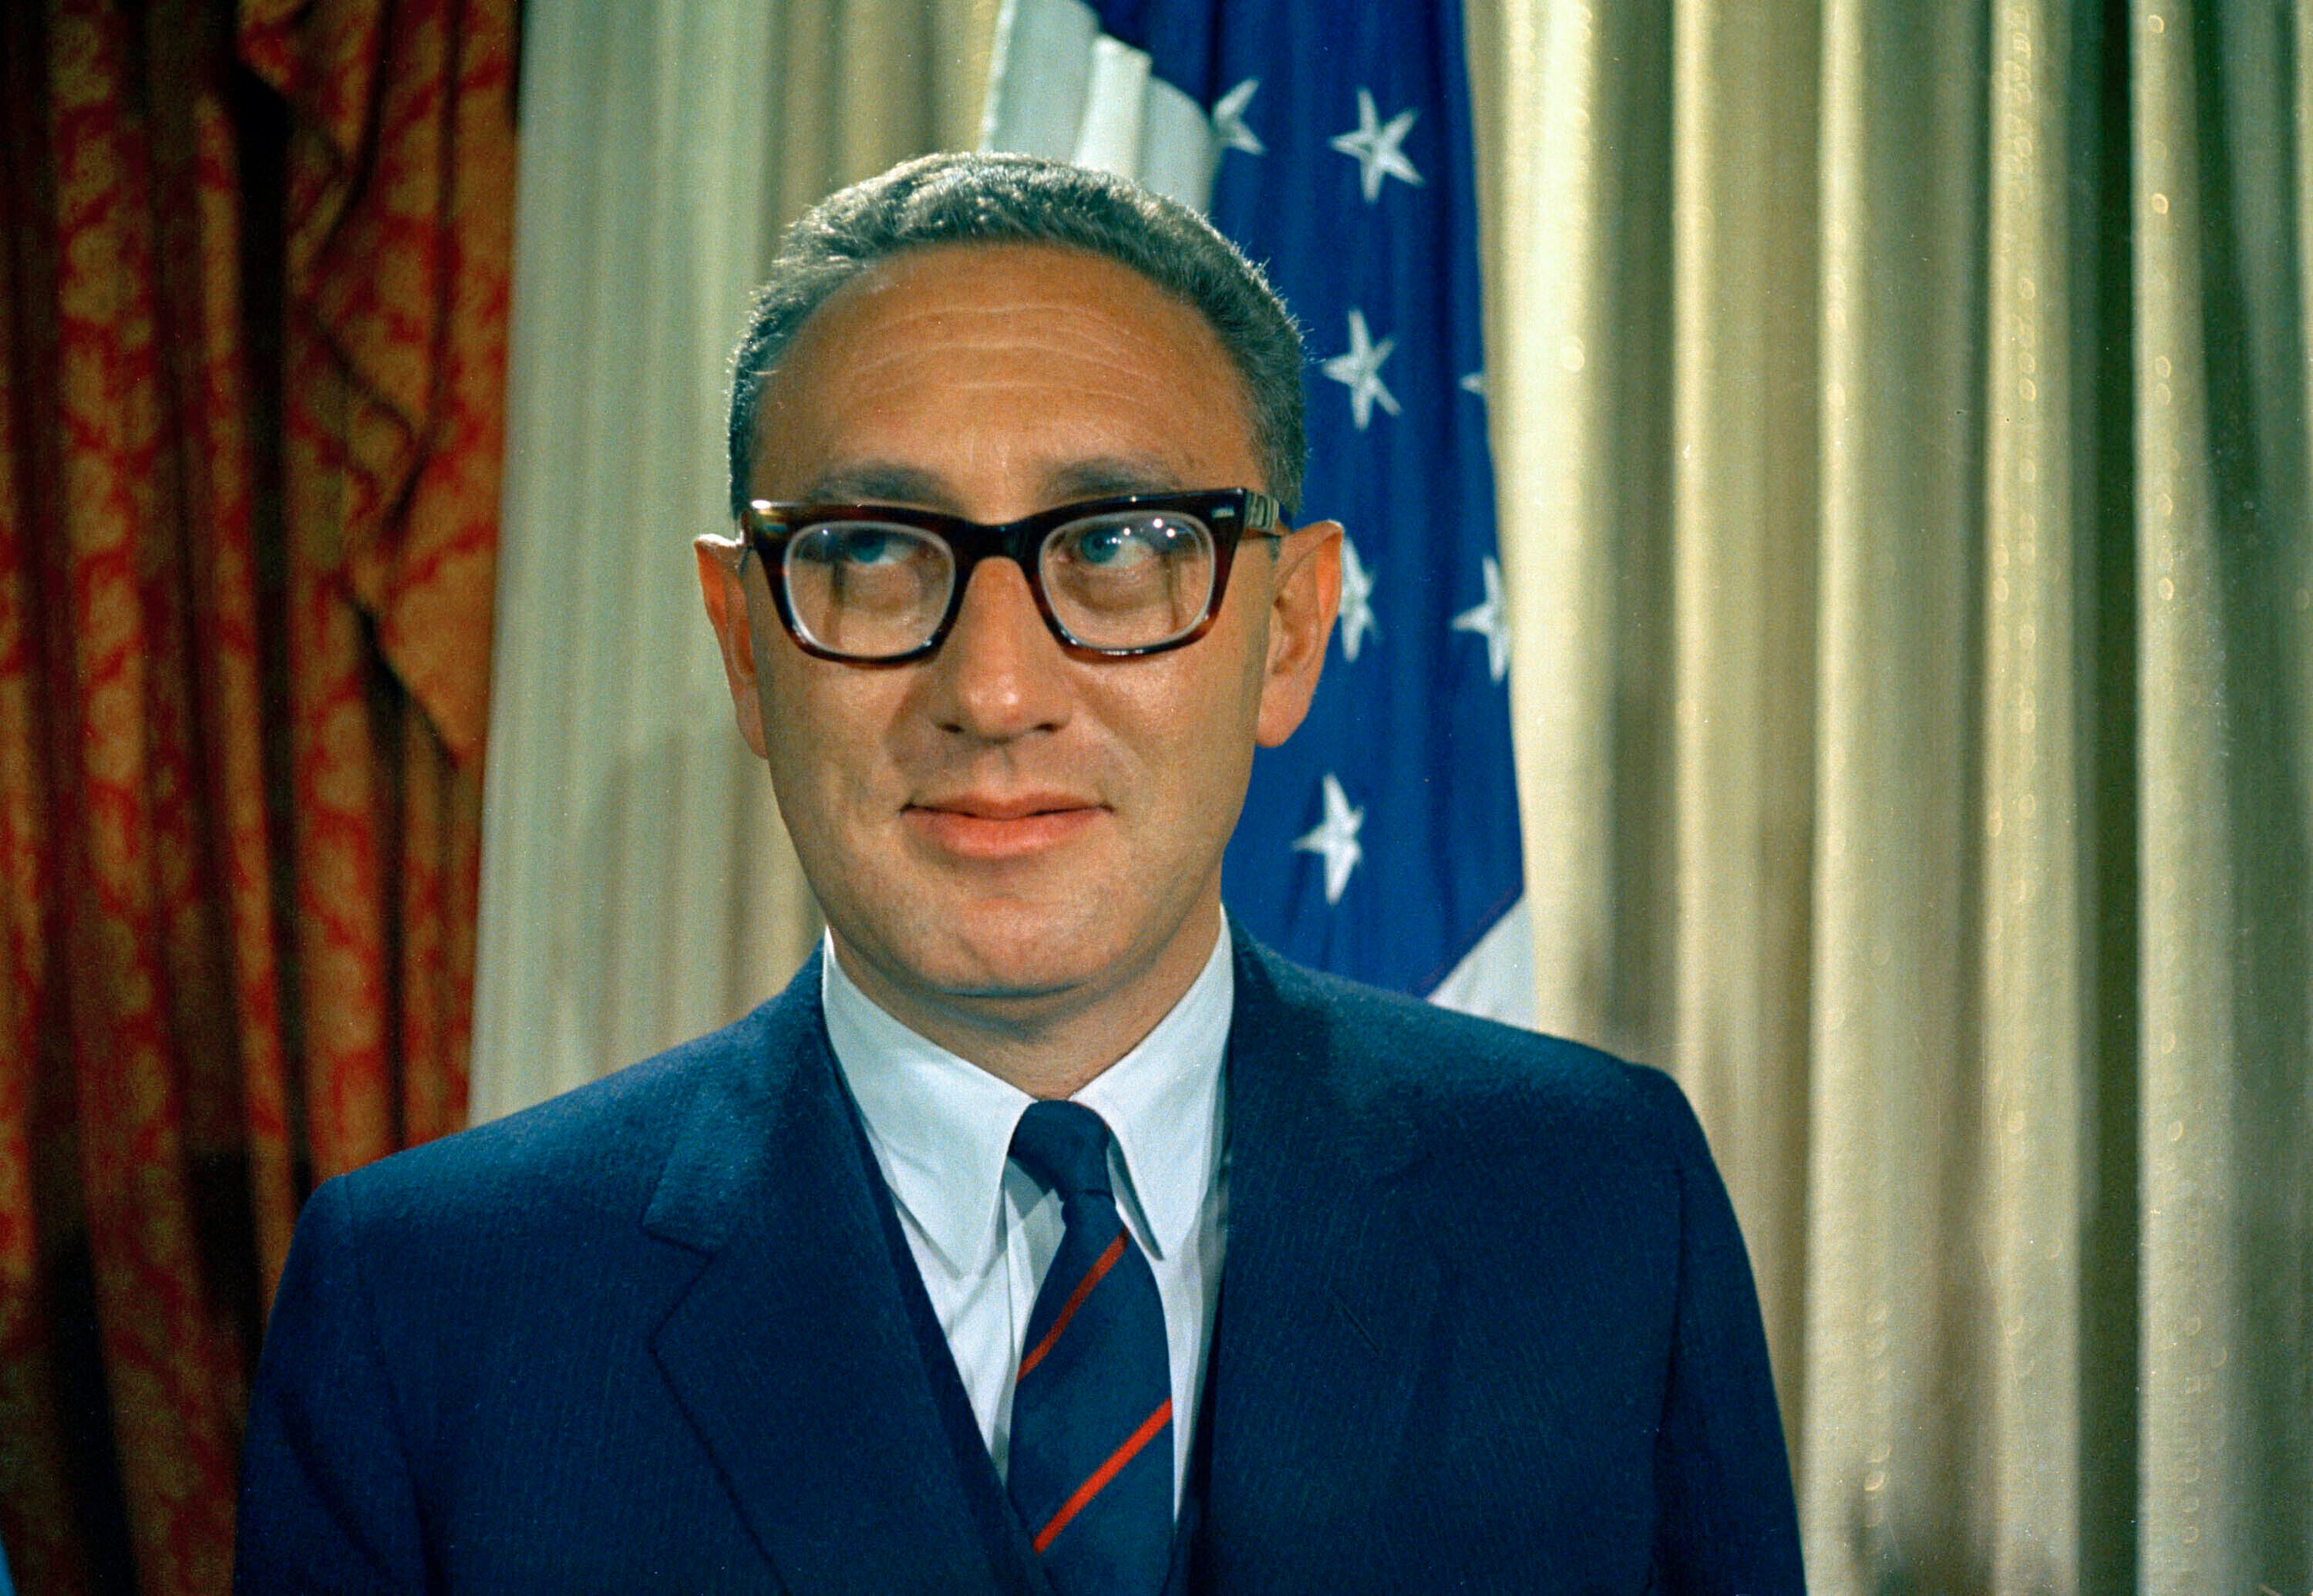 Henry Kissinger, professor of government at Harvard University, is seen in this December 1968 photo.